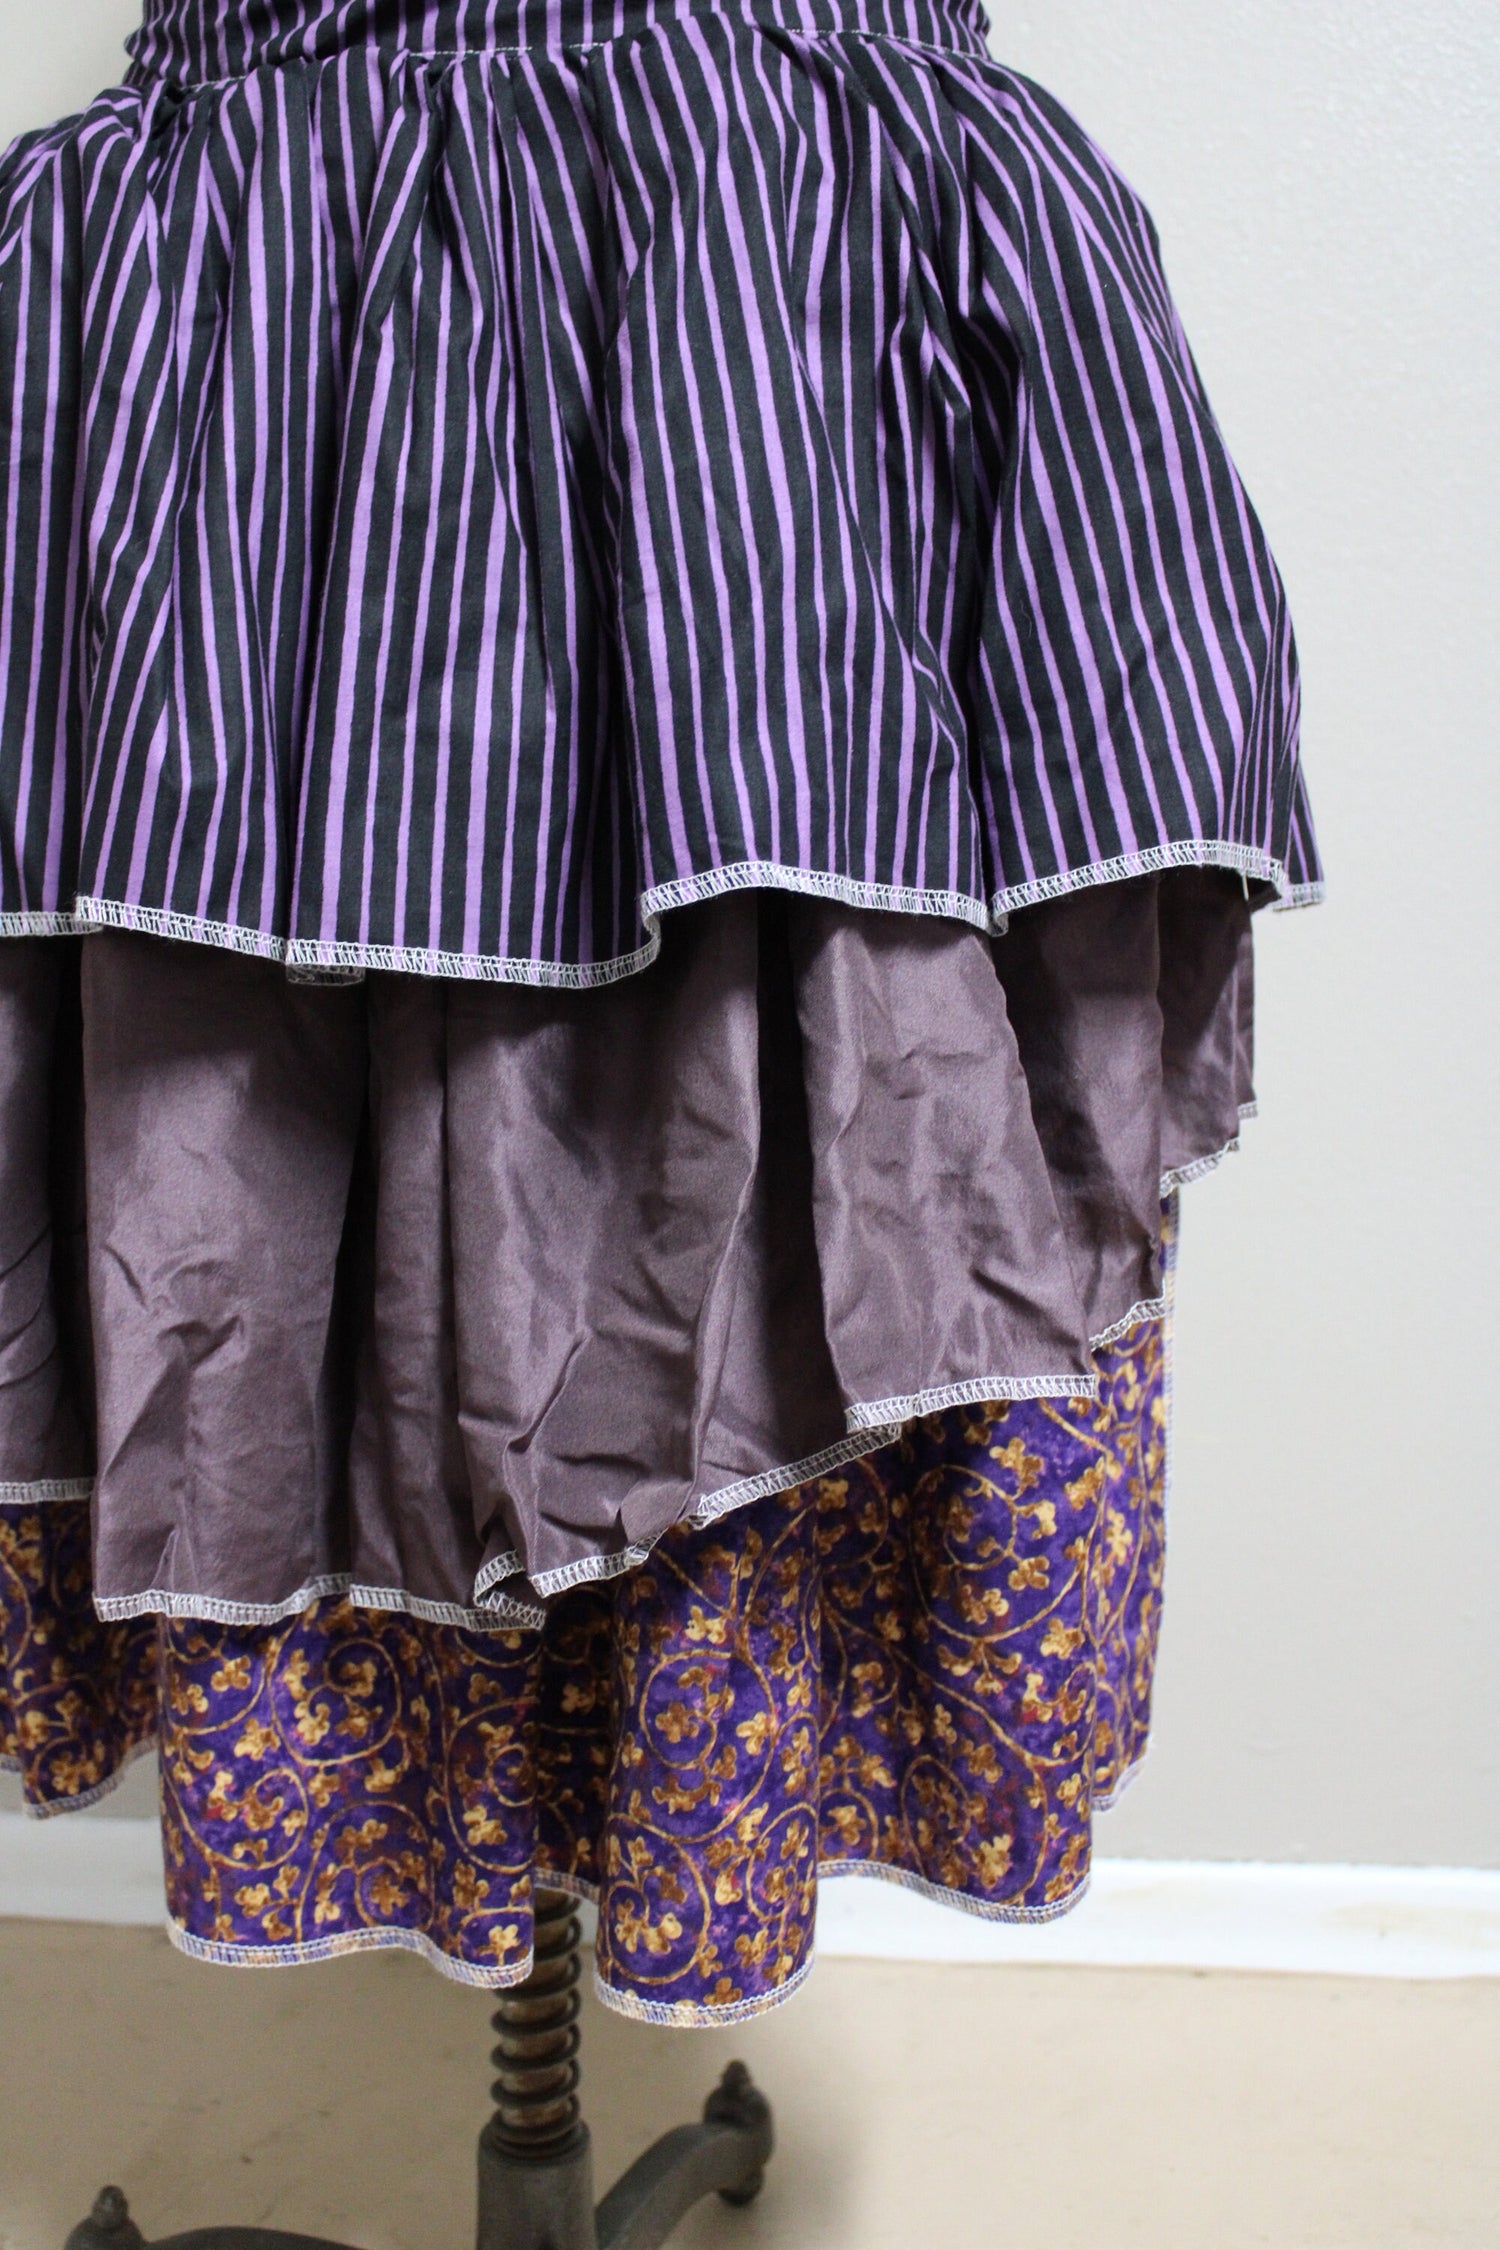 Tim Burton Inspired Purple and Black Striped Steampunk / Goth Bustle Size M+ Lord and Lady Towers